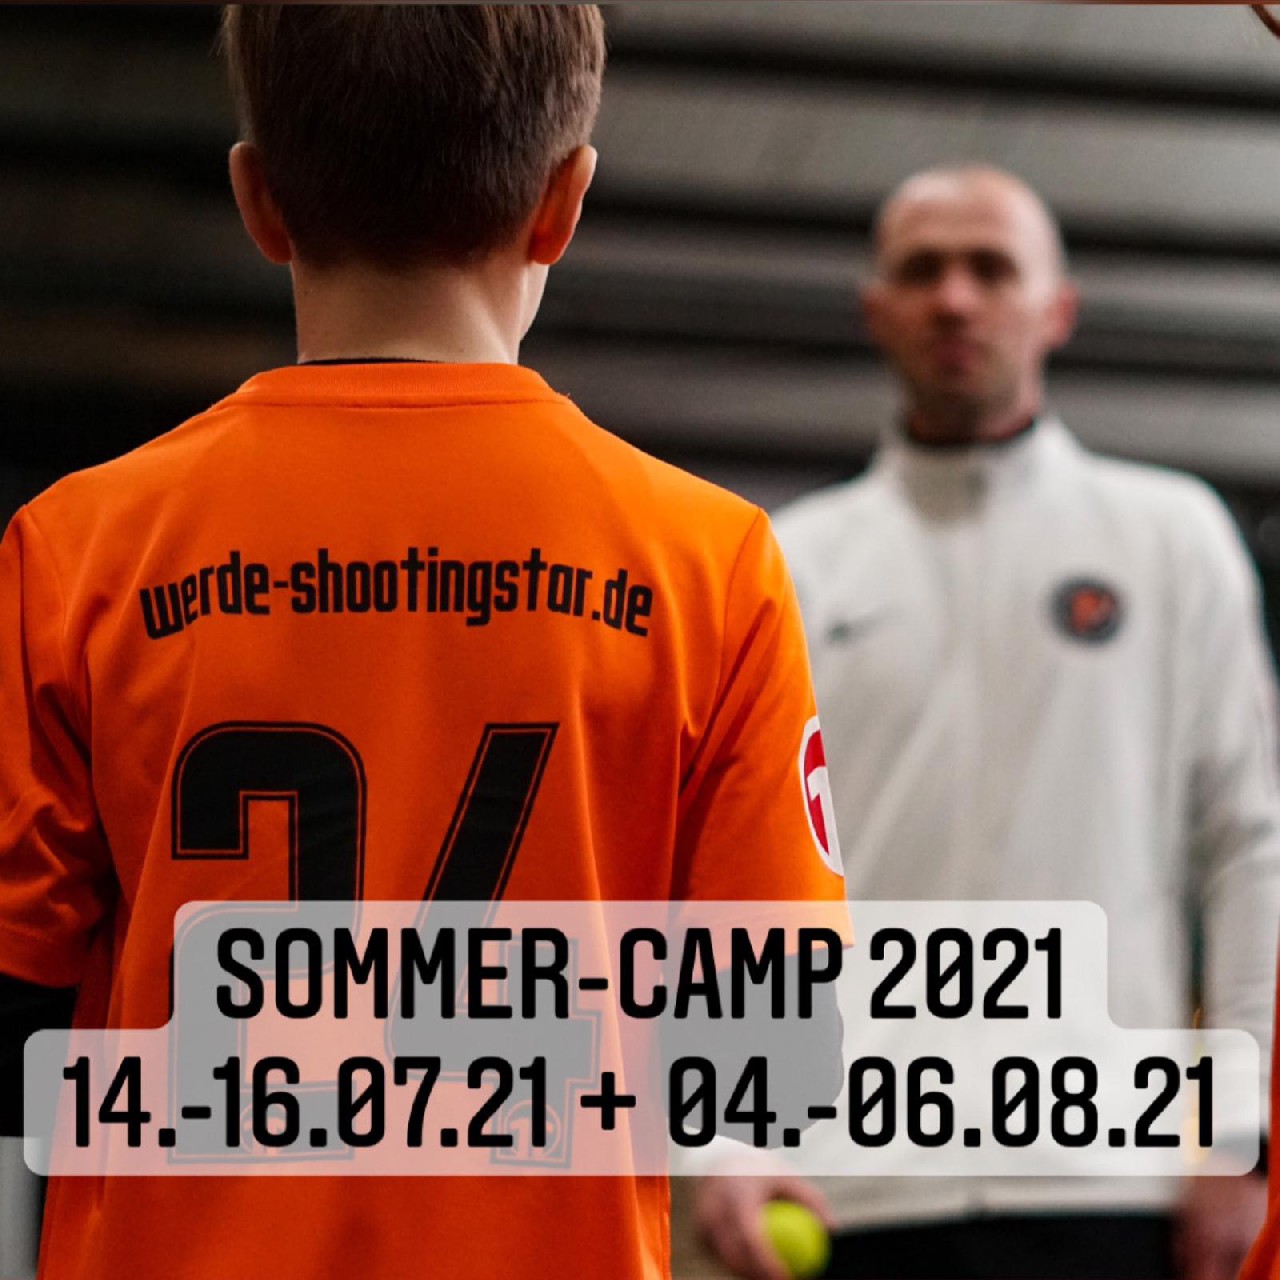 2x Shooting Star Sommer-Camp in Hiltrup